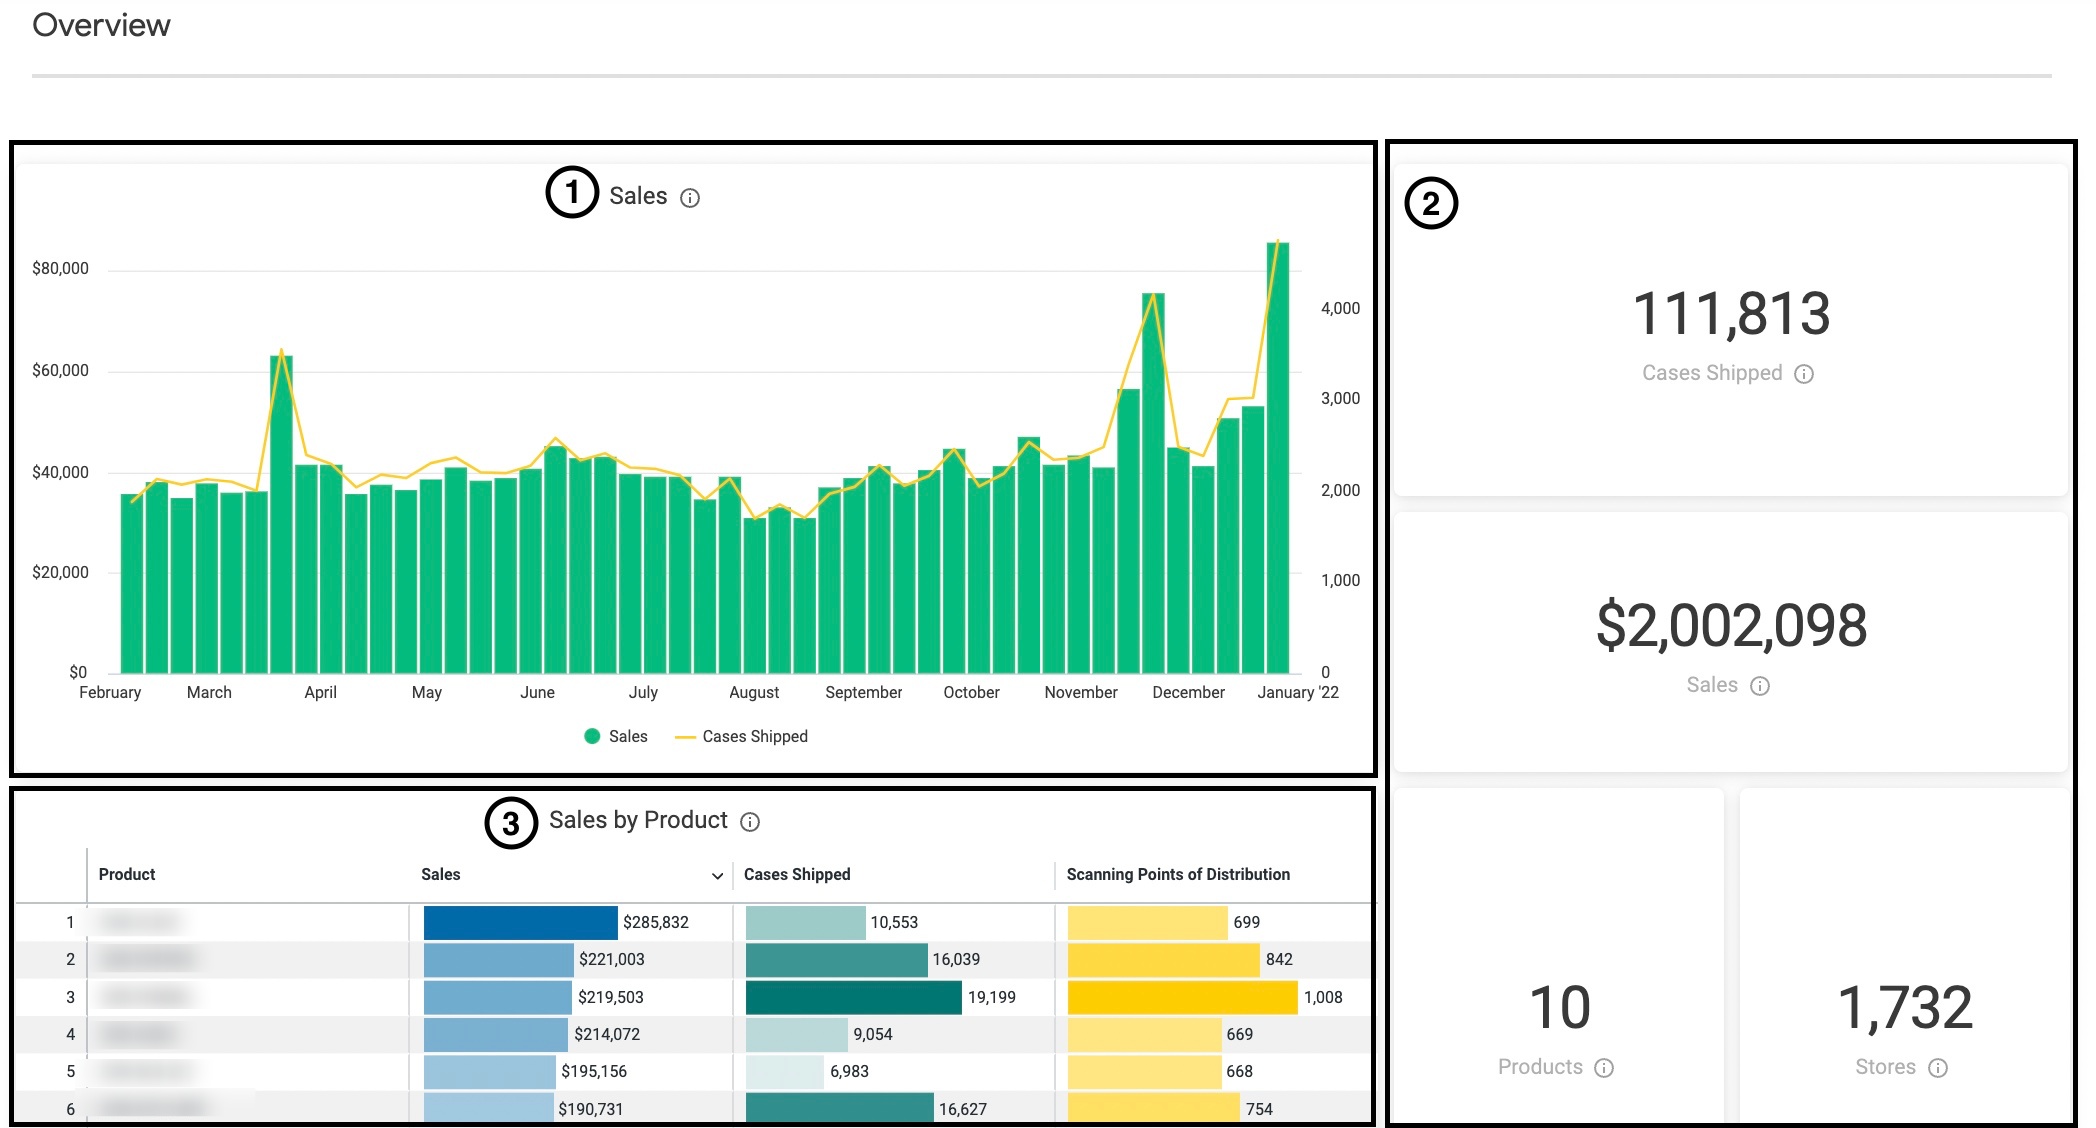 Sales Dashboard_Overview.jpeg